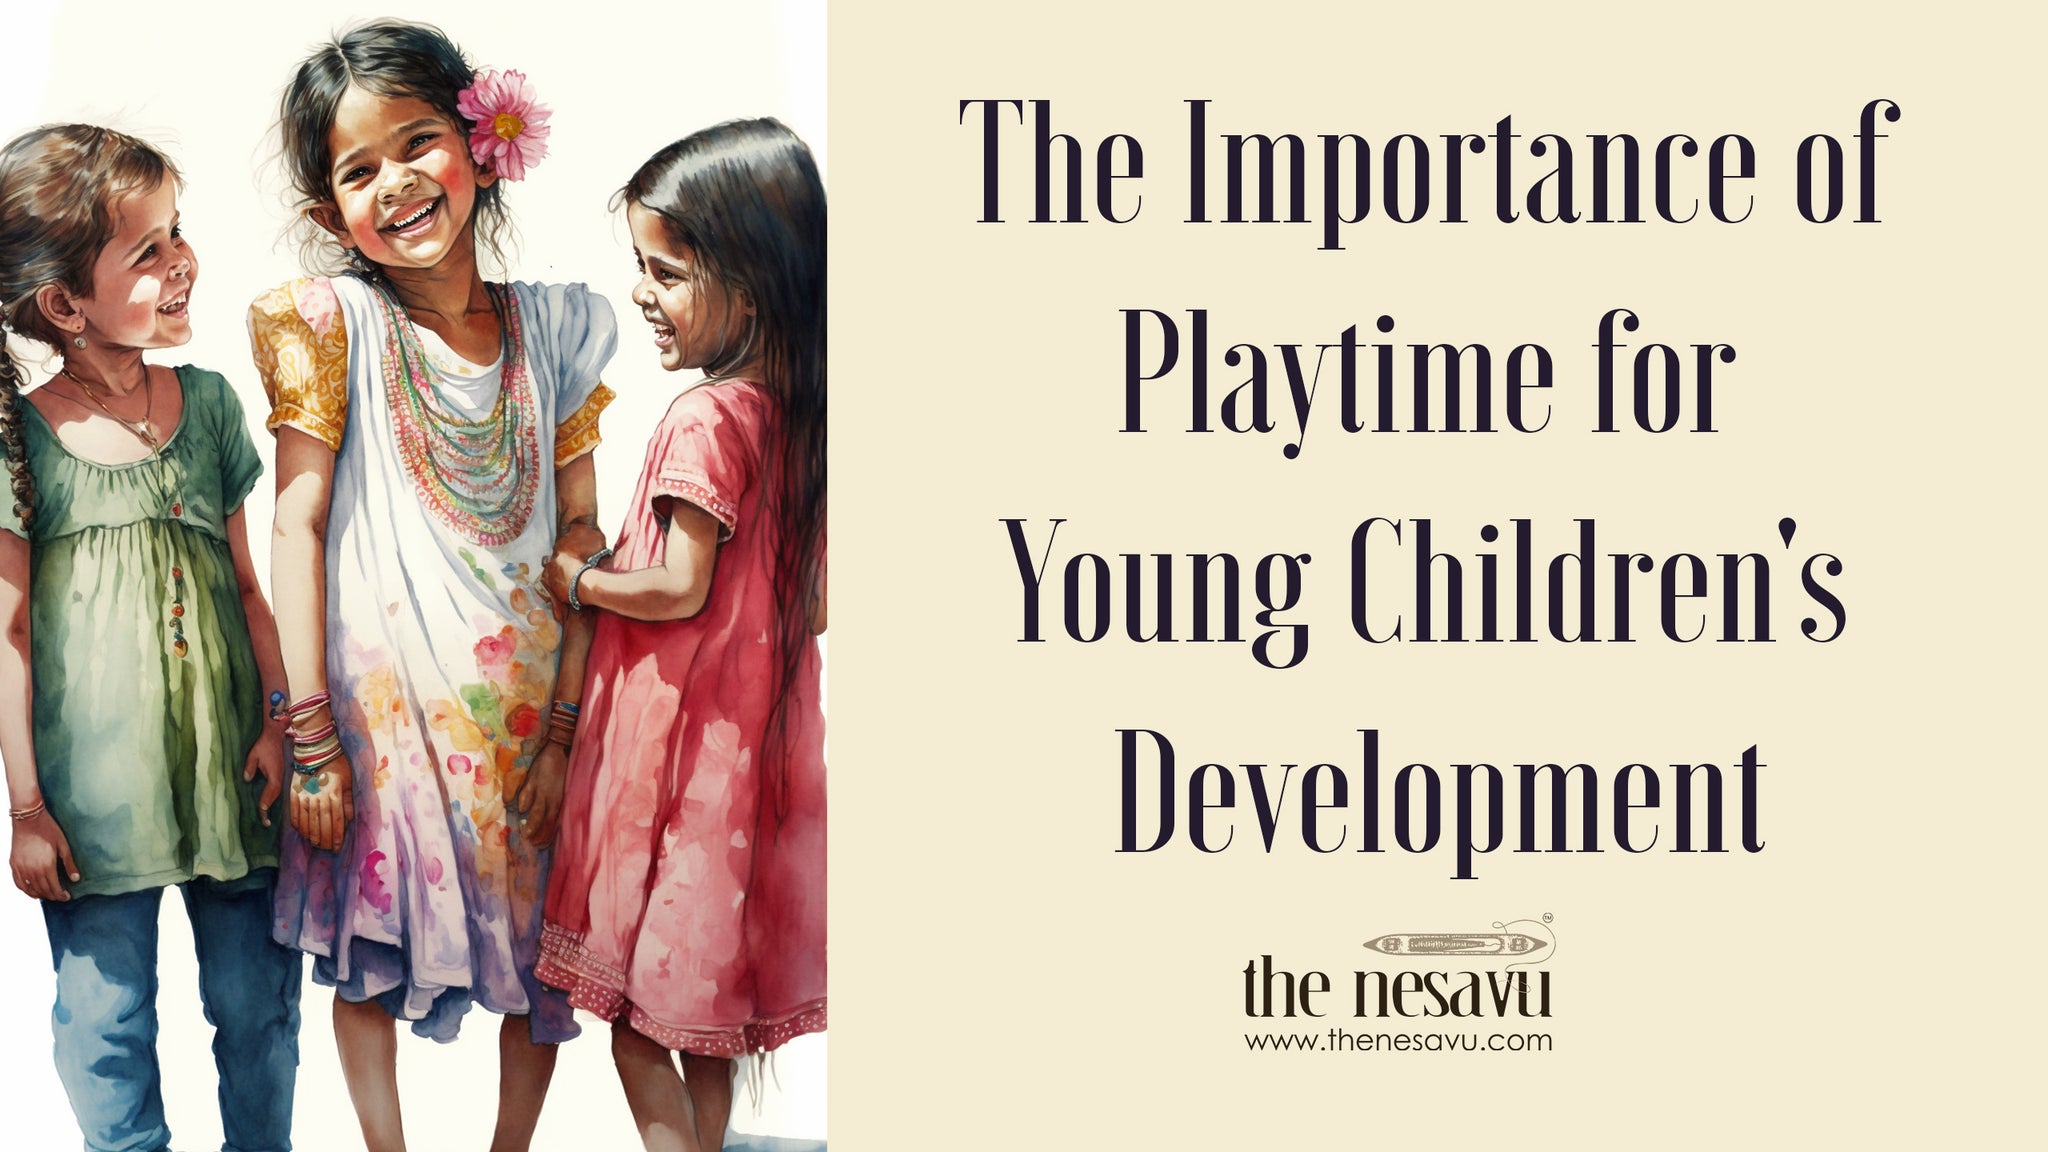 Nesavu's Blog on The Importance of Playtime for Young Children's Development